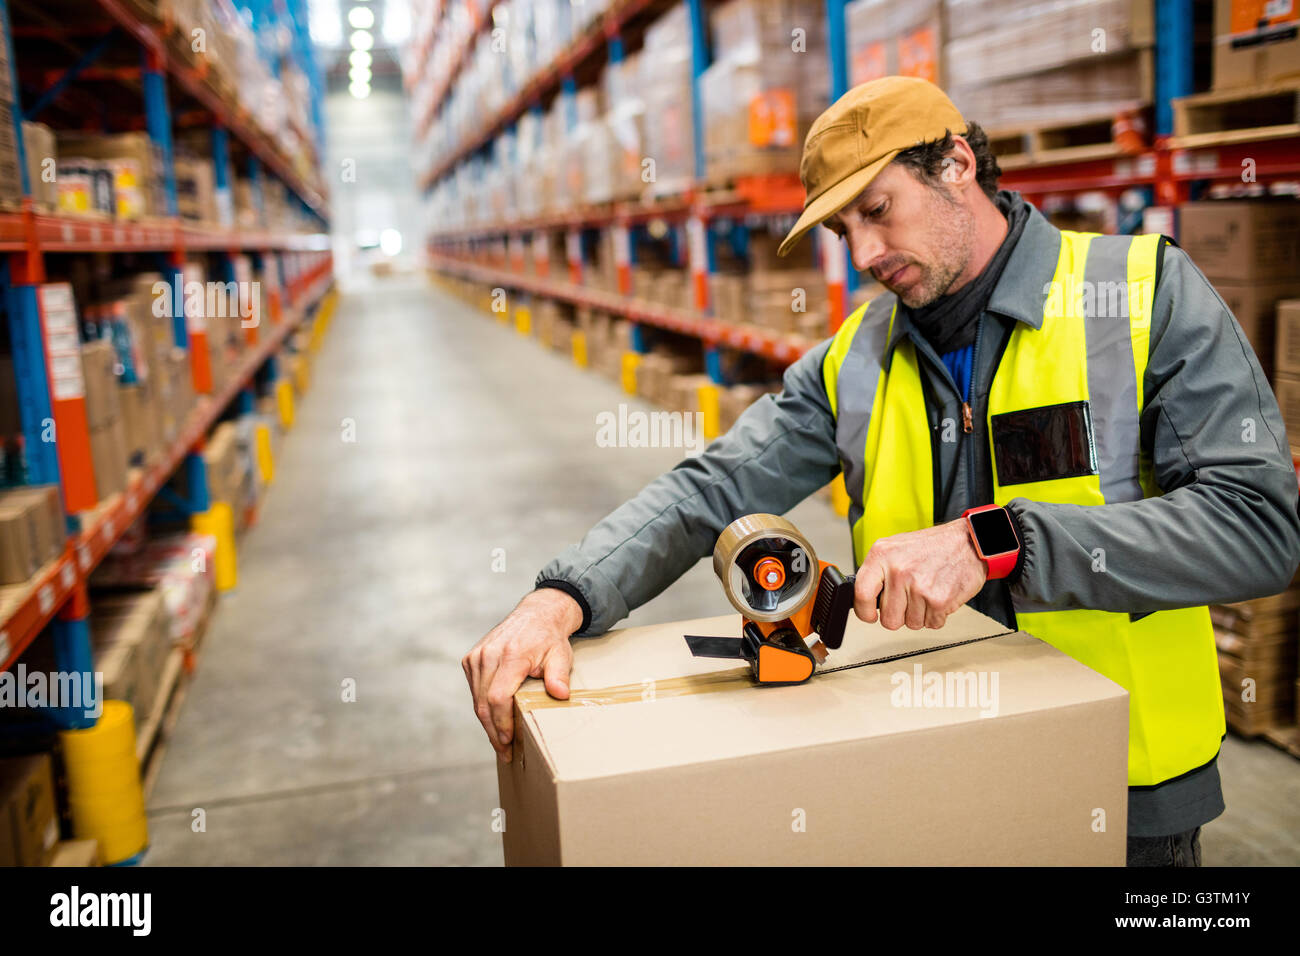 Man worker taping up a box Stock Photo